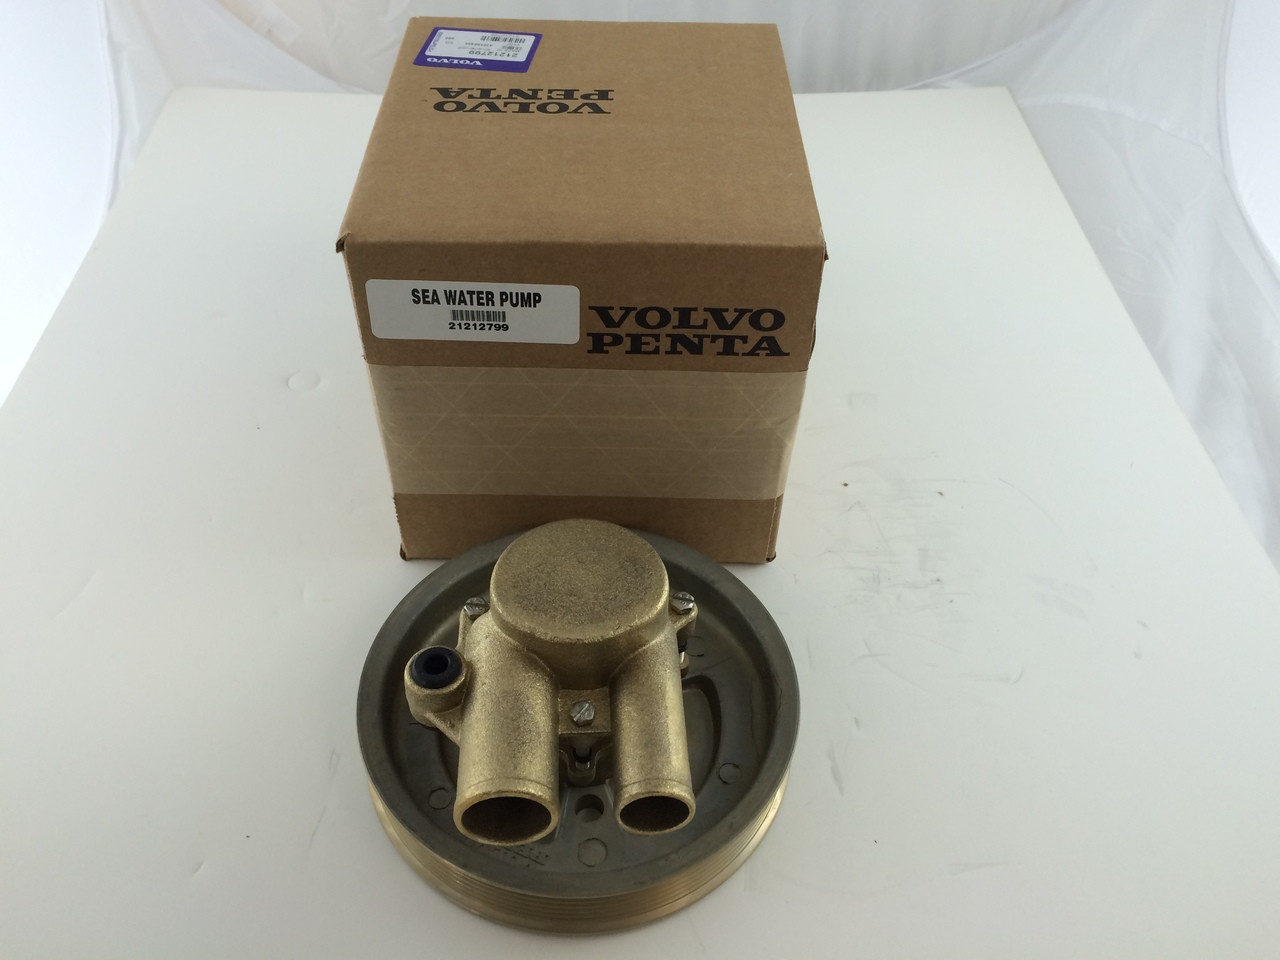 $479.99* GENUINE VOLVO  no tax* SEA WATER PUMP 21212799 *In Stock & Ready To Ship!